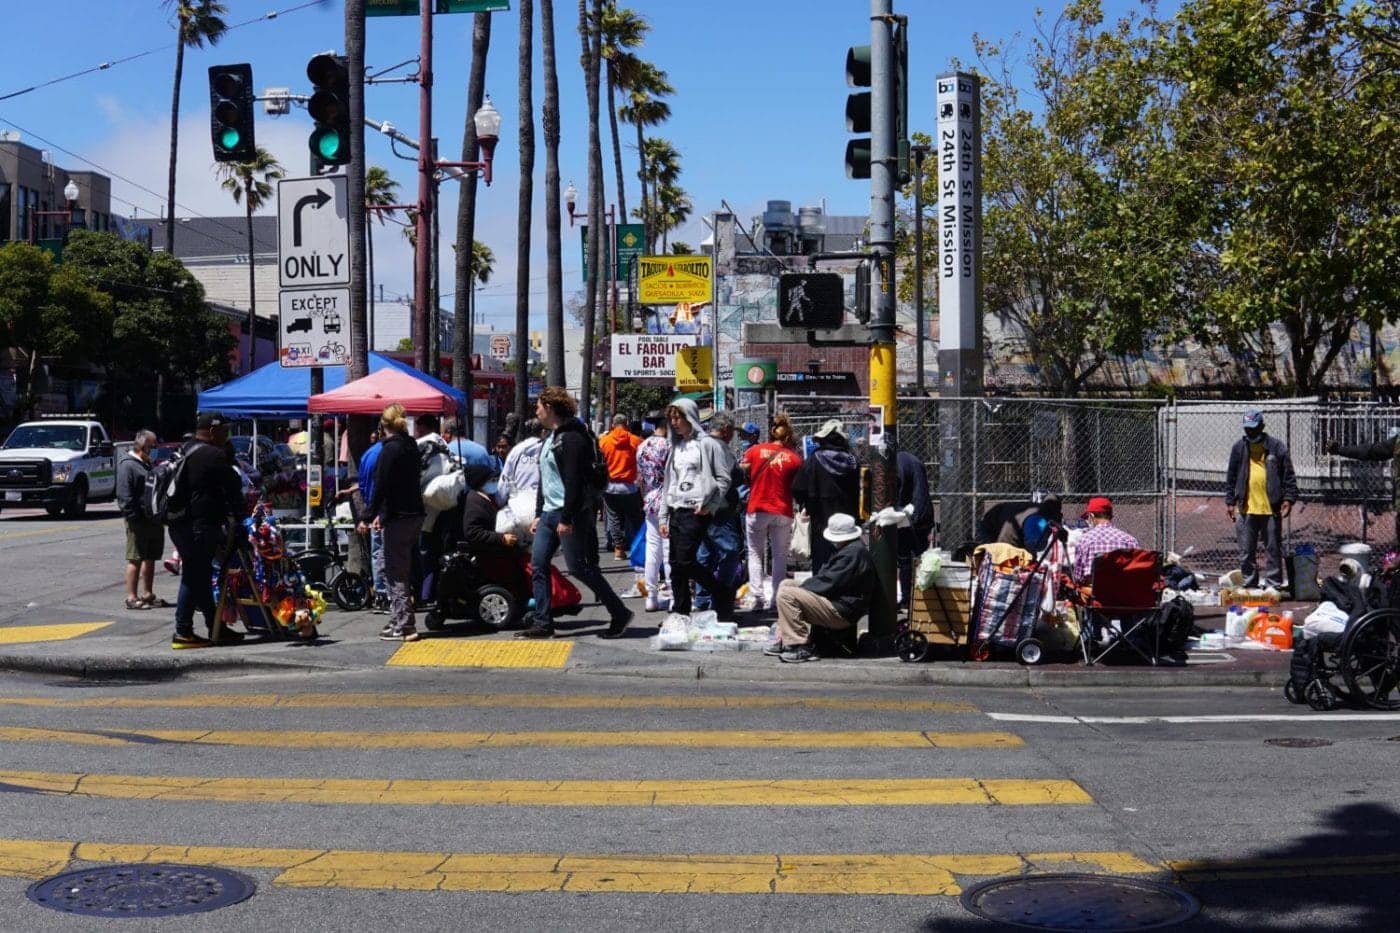 24th-St.-BART-plaza-vendors-and-fence-by-Joshua-Baltodano-072522-1400x933, Crackdown on the culture: Vendors barred from 24th St. BART plaza, Local News & Views News & Views 